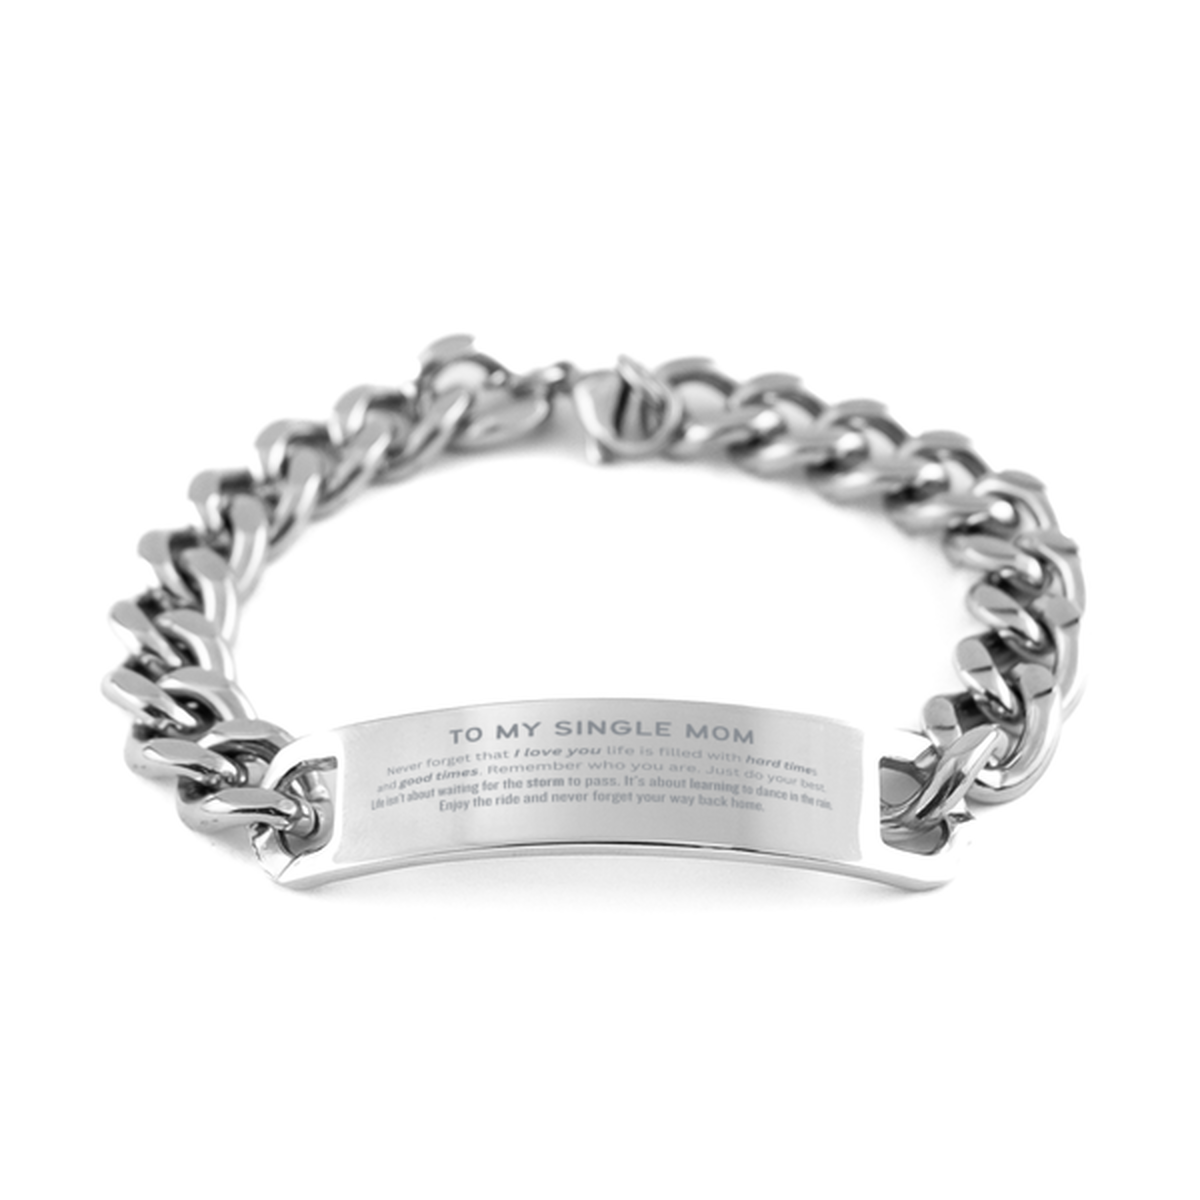 Christmas Single Mom Cuban Chain Stainless Steel Bracelet Gifts, To My Single Mom Birthday Thank You Gifts For Single Mom, Graduation Unique Gifts For Single Mom To My Single Mom Never forget that I love you life is filled with hard times and good times.